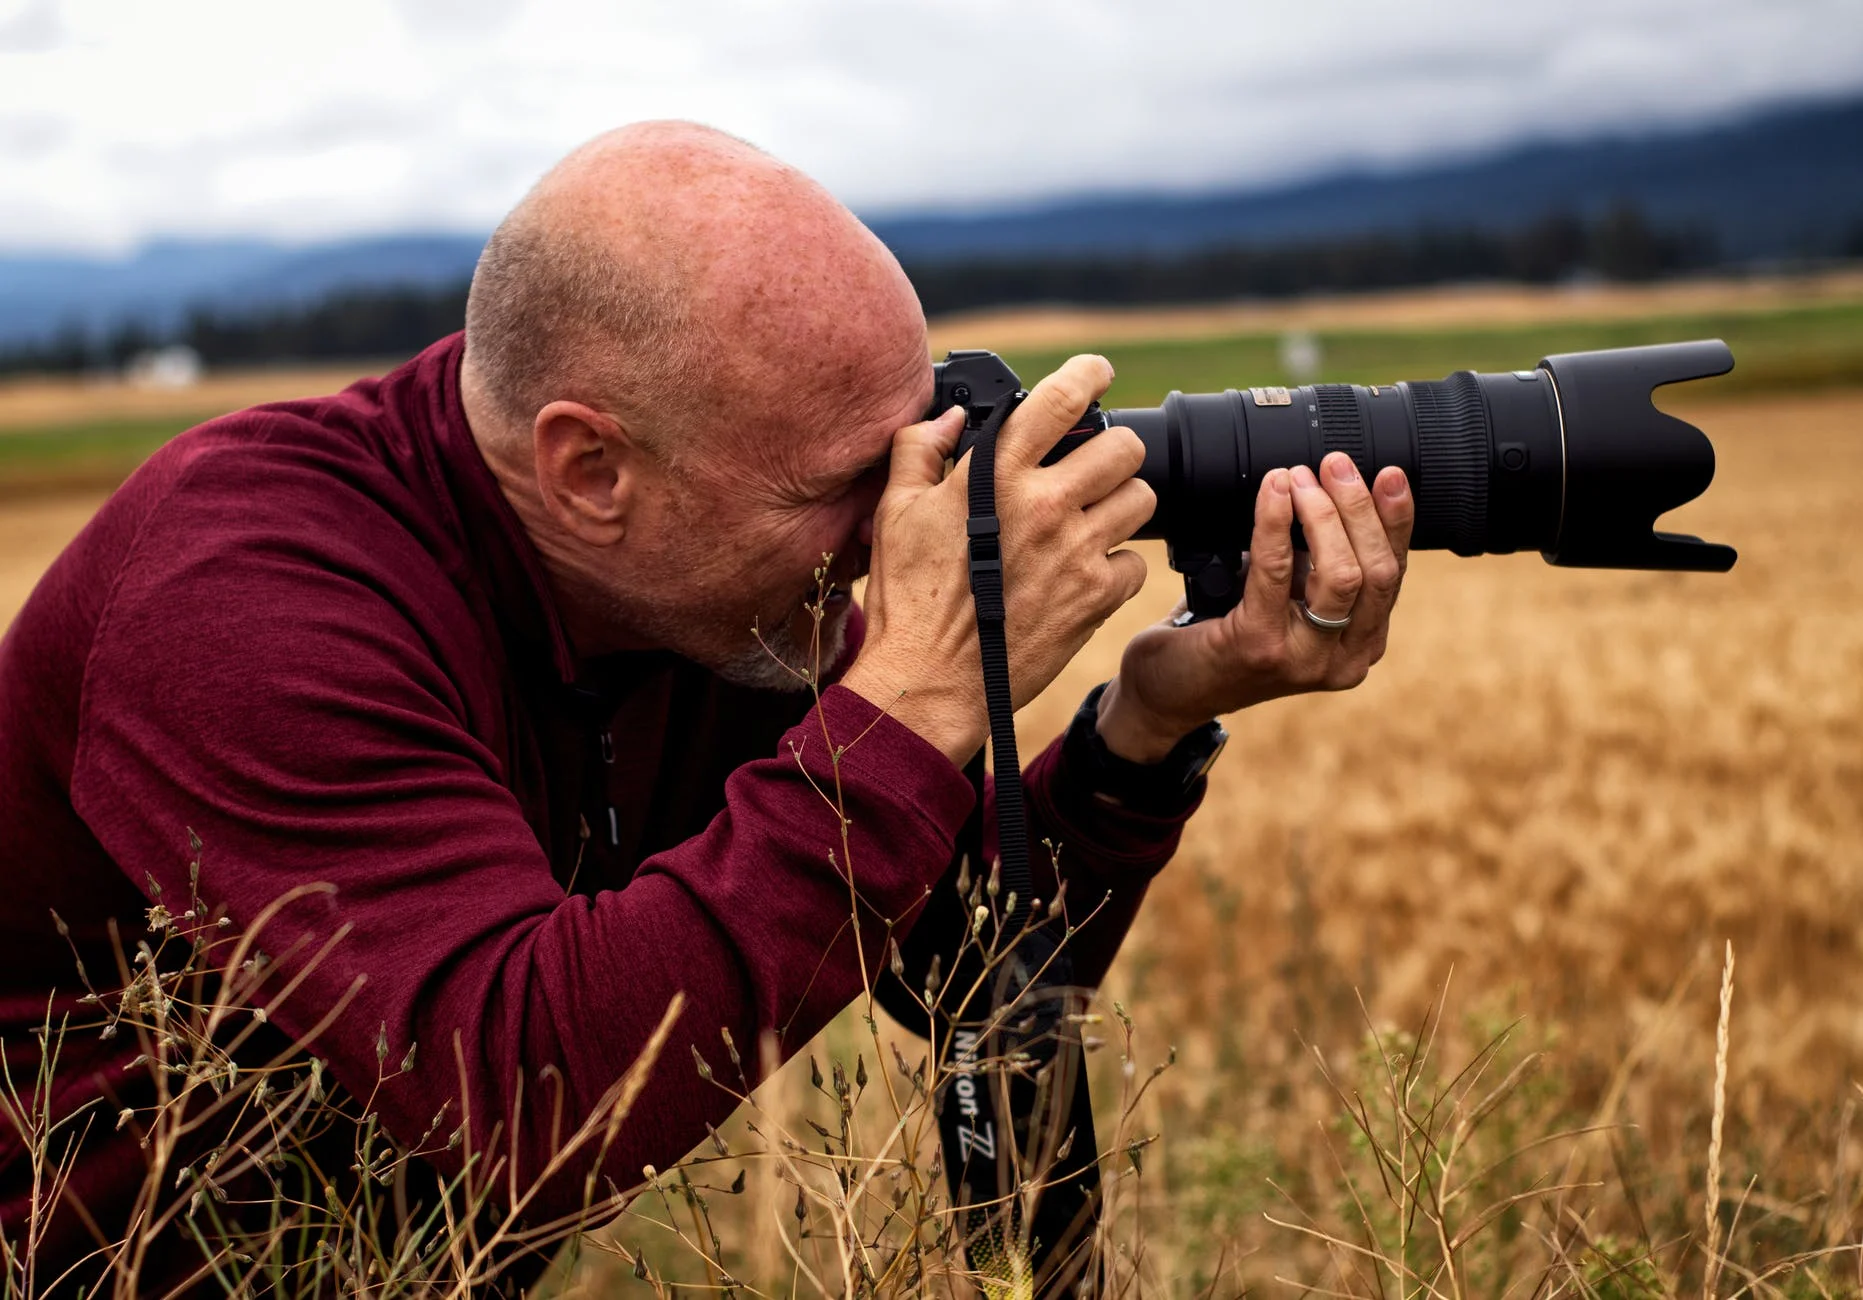 photography of a man holding a DSLR camera while preparing to take a photo